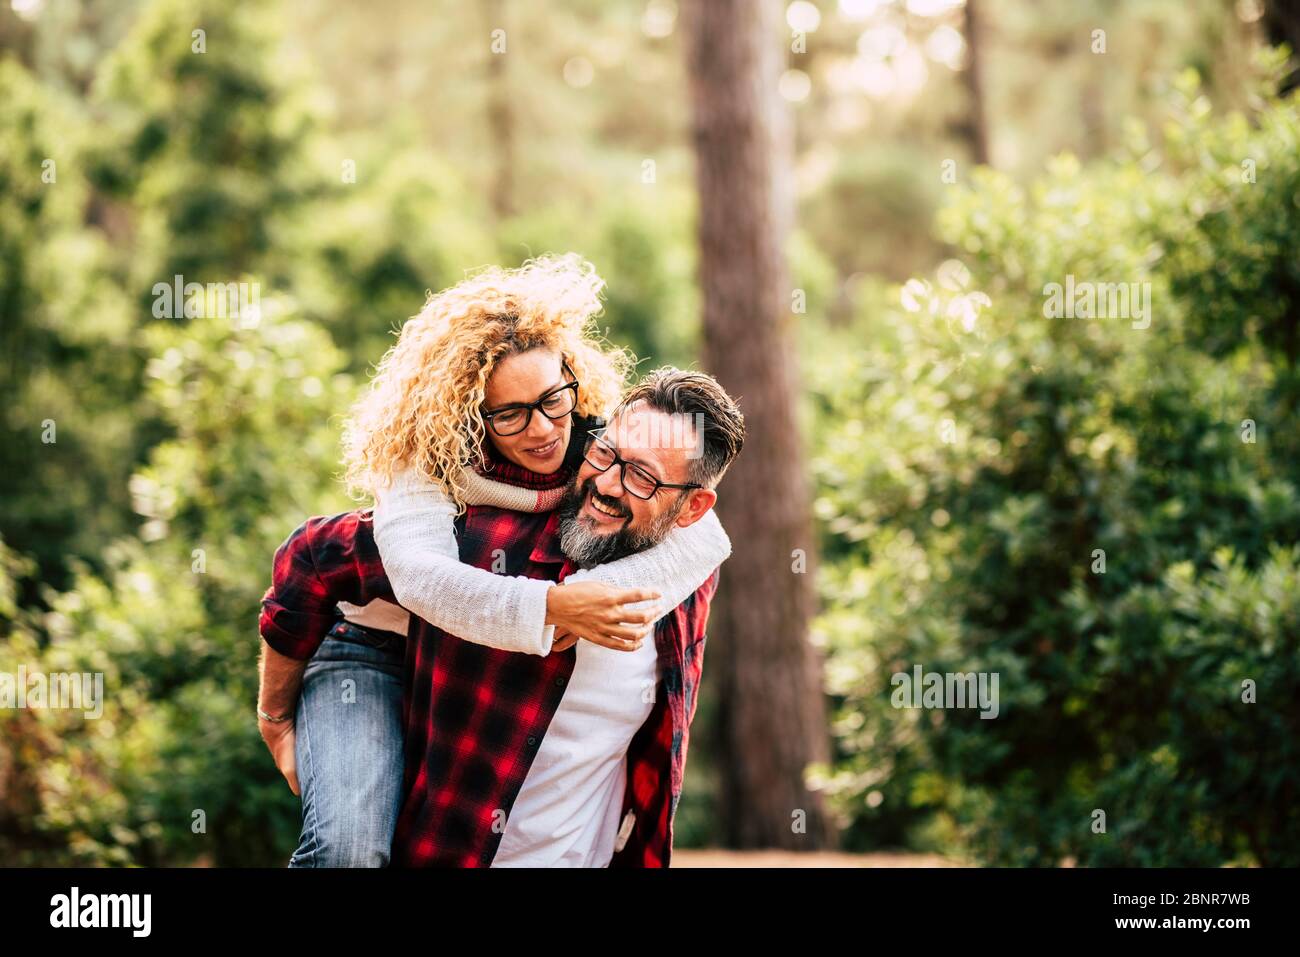 Happy adult caucasian couple in relationship and love play together in the forest wood nature - outdoor people leisure activity concept with cheerful caucasians Stock Photo